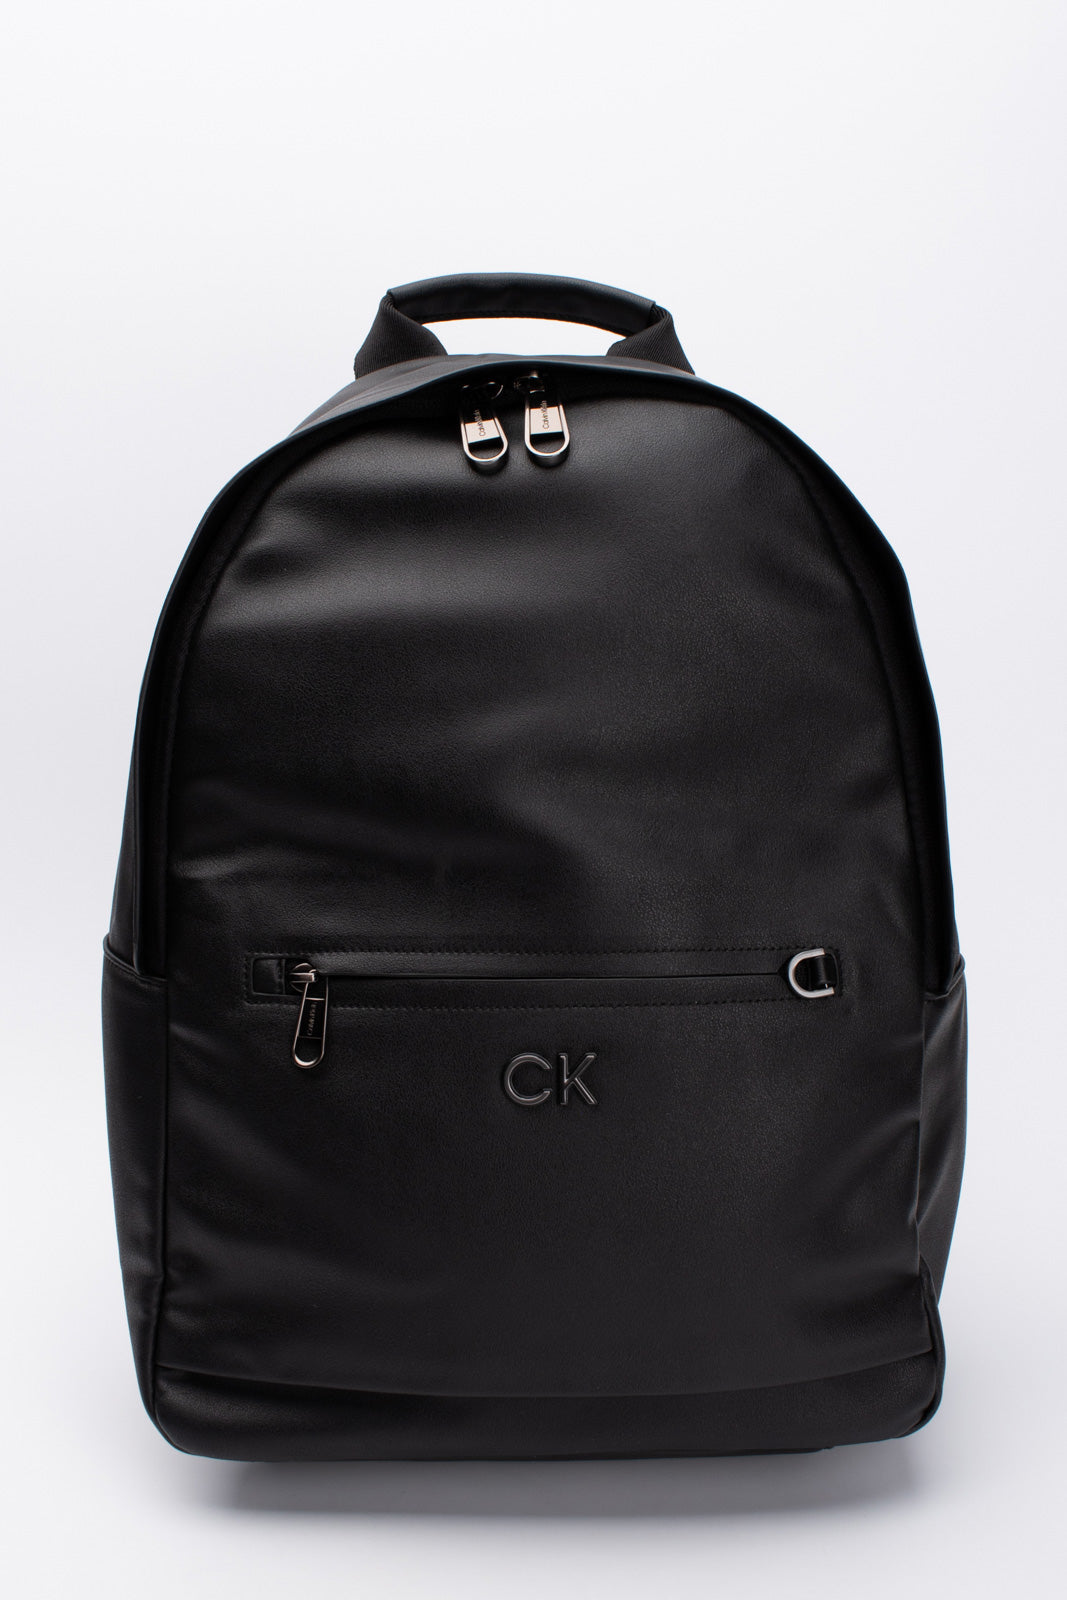 CALVIN KLEIN PU Leather Backpack Large Black Laptop Sleeve Padded Back & Straps gallery main photo